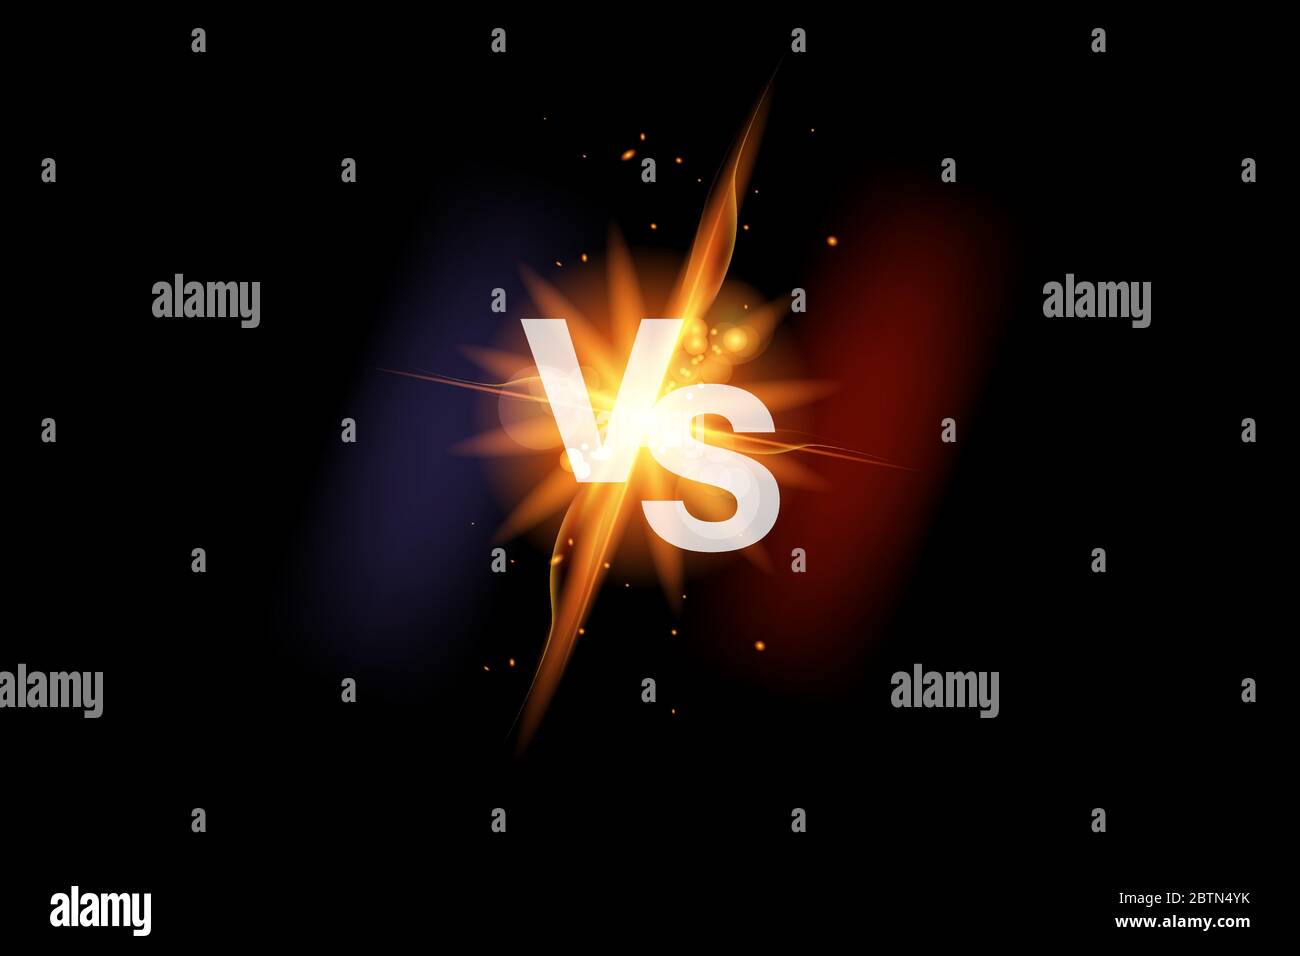 Vs versus battle sport background. Versus fight icon with fire. Vs duel icon. Vector illustration Stock Vector